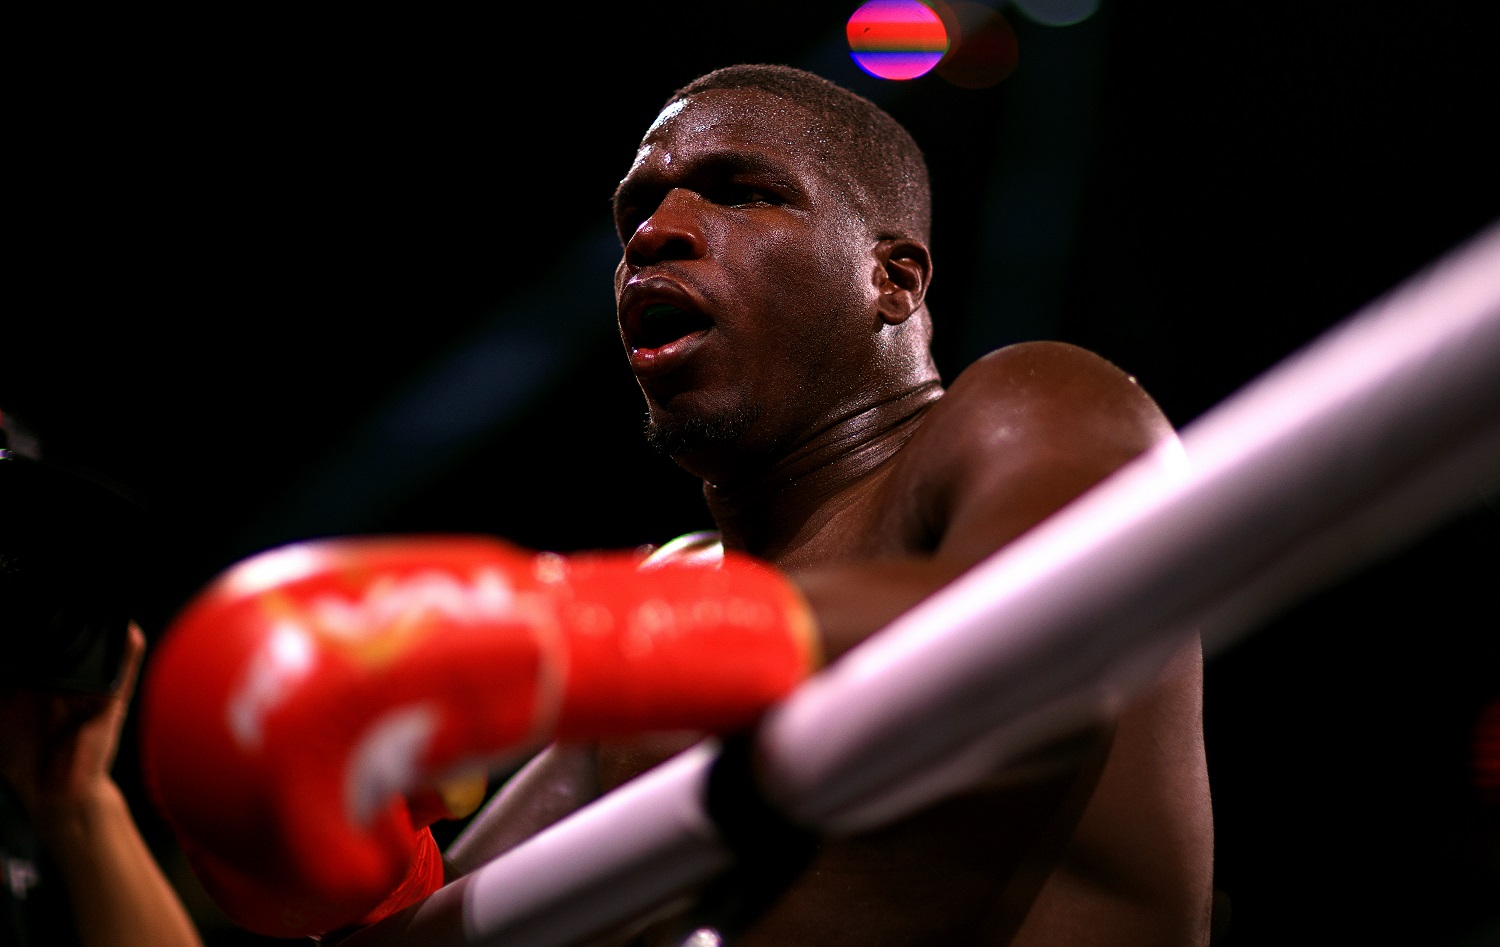 Frank Gore during a fight against Deron Williams on Dec. 18, 2021, in Tampa, Florida. | Mike Ehrmann/Getty Images